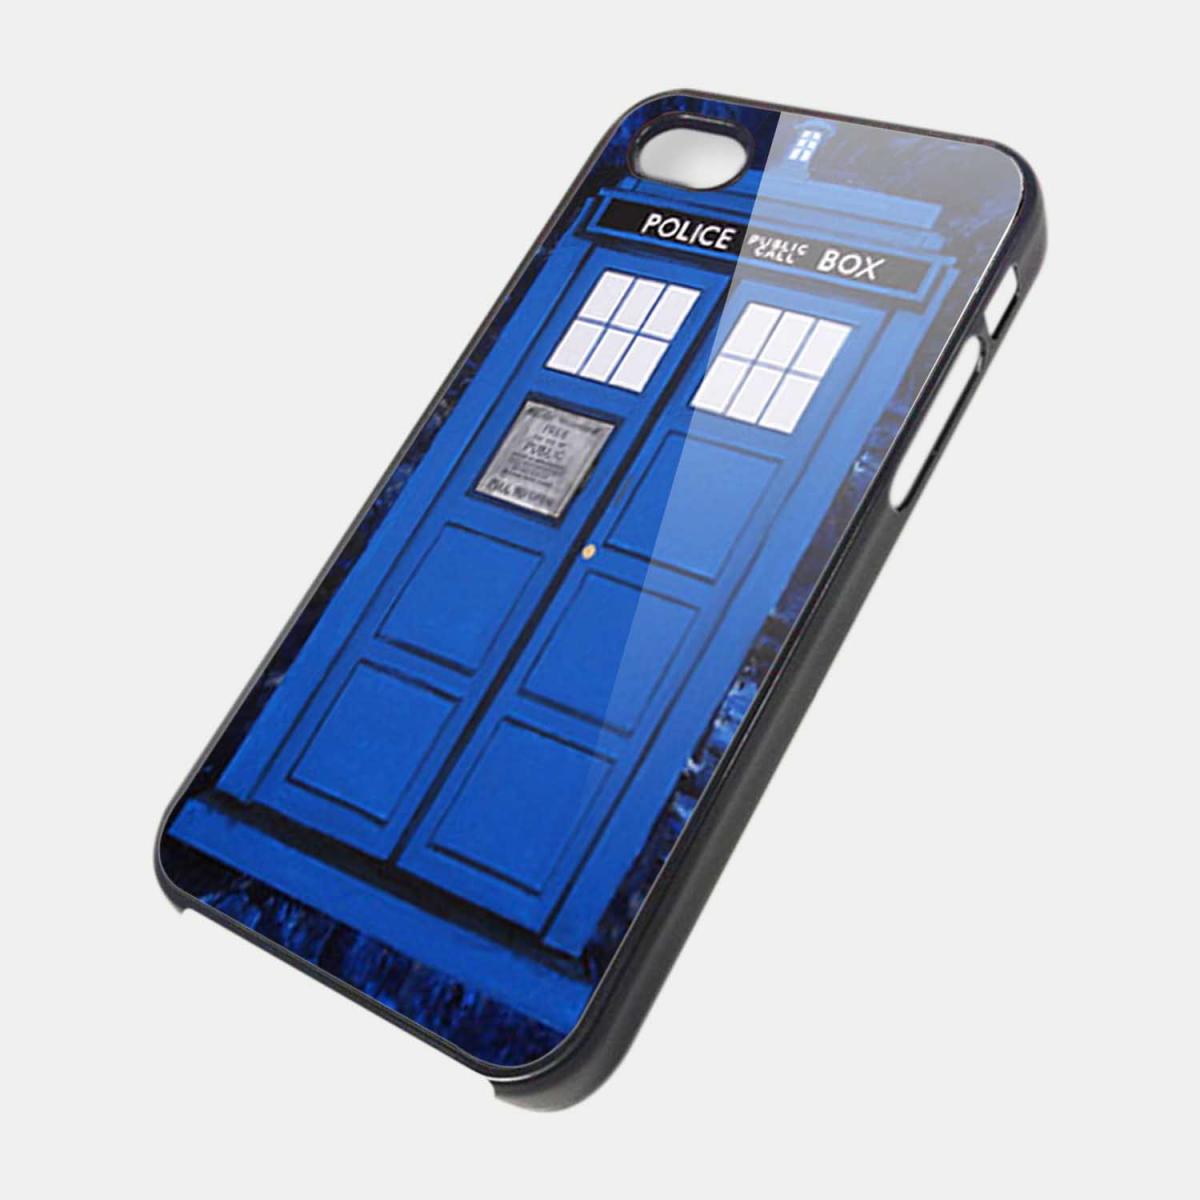 Doctor Who Tardis Special Design Iphone 4 Case Cover